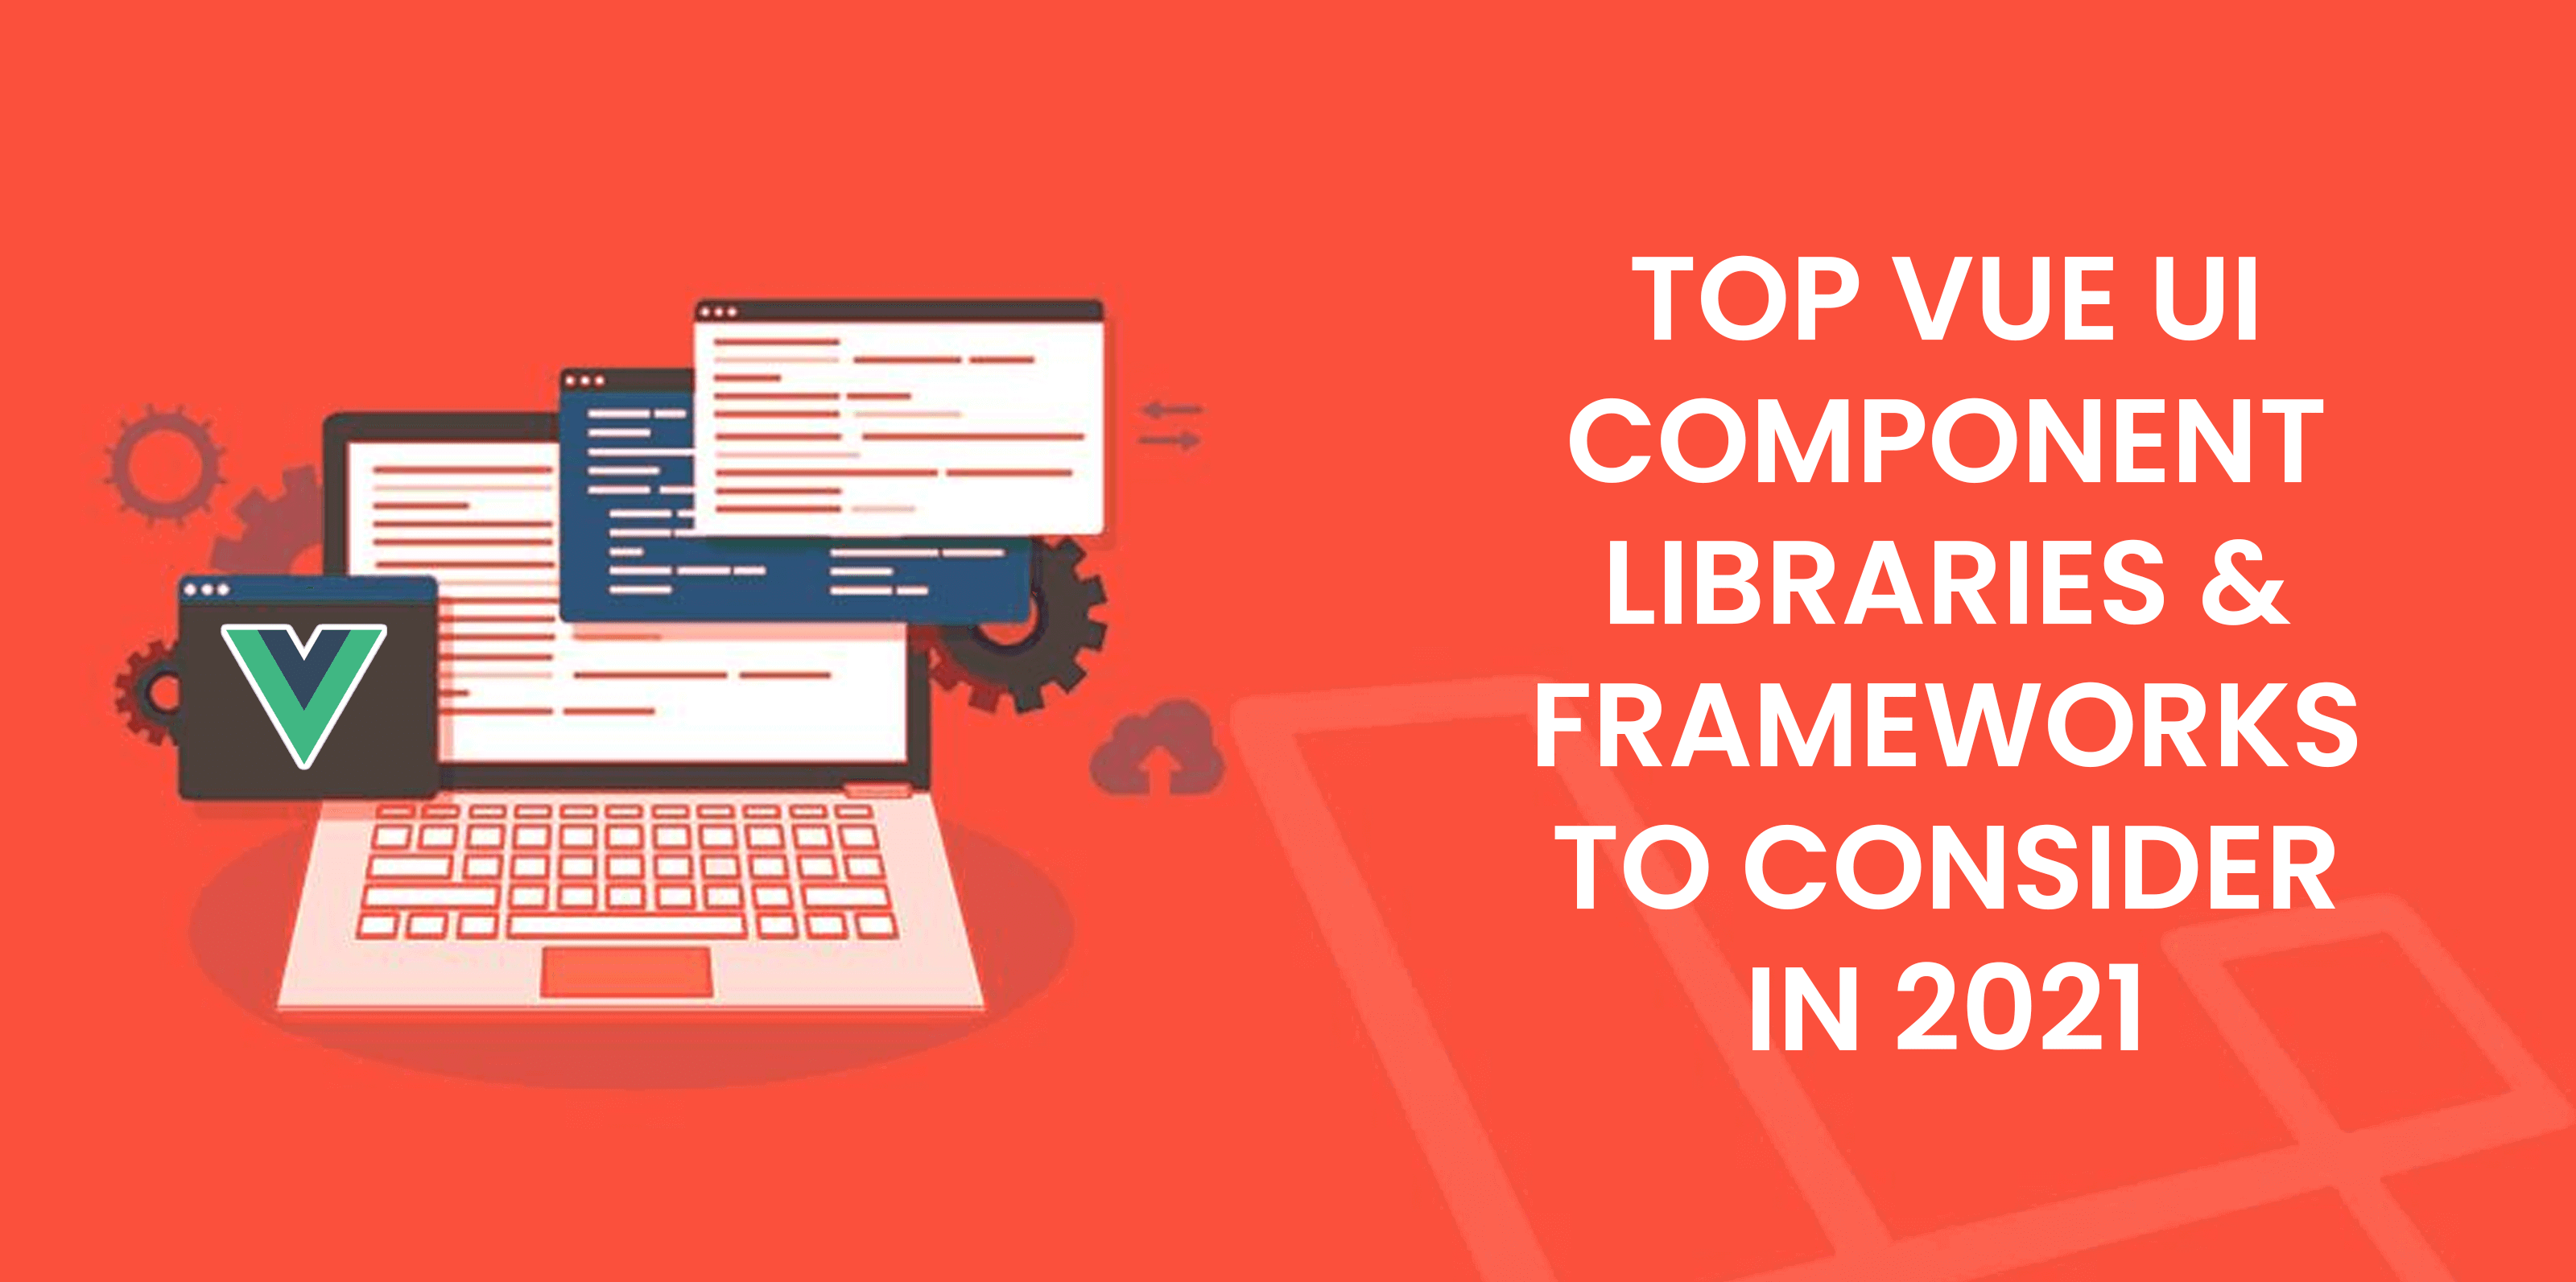 Top-Vue-UI-Component-Libraries-and-Frameworks-to-Consider-in-2021